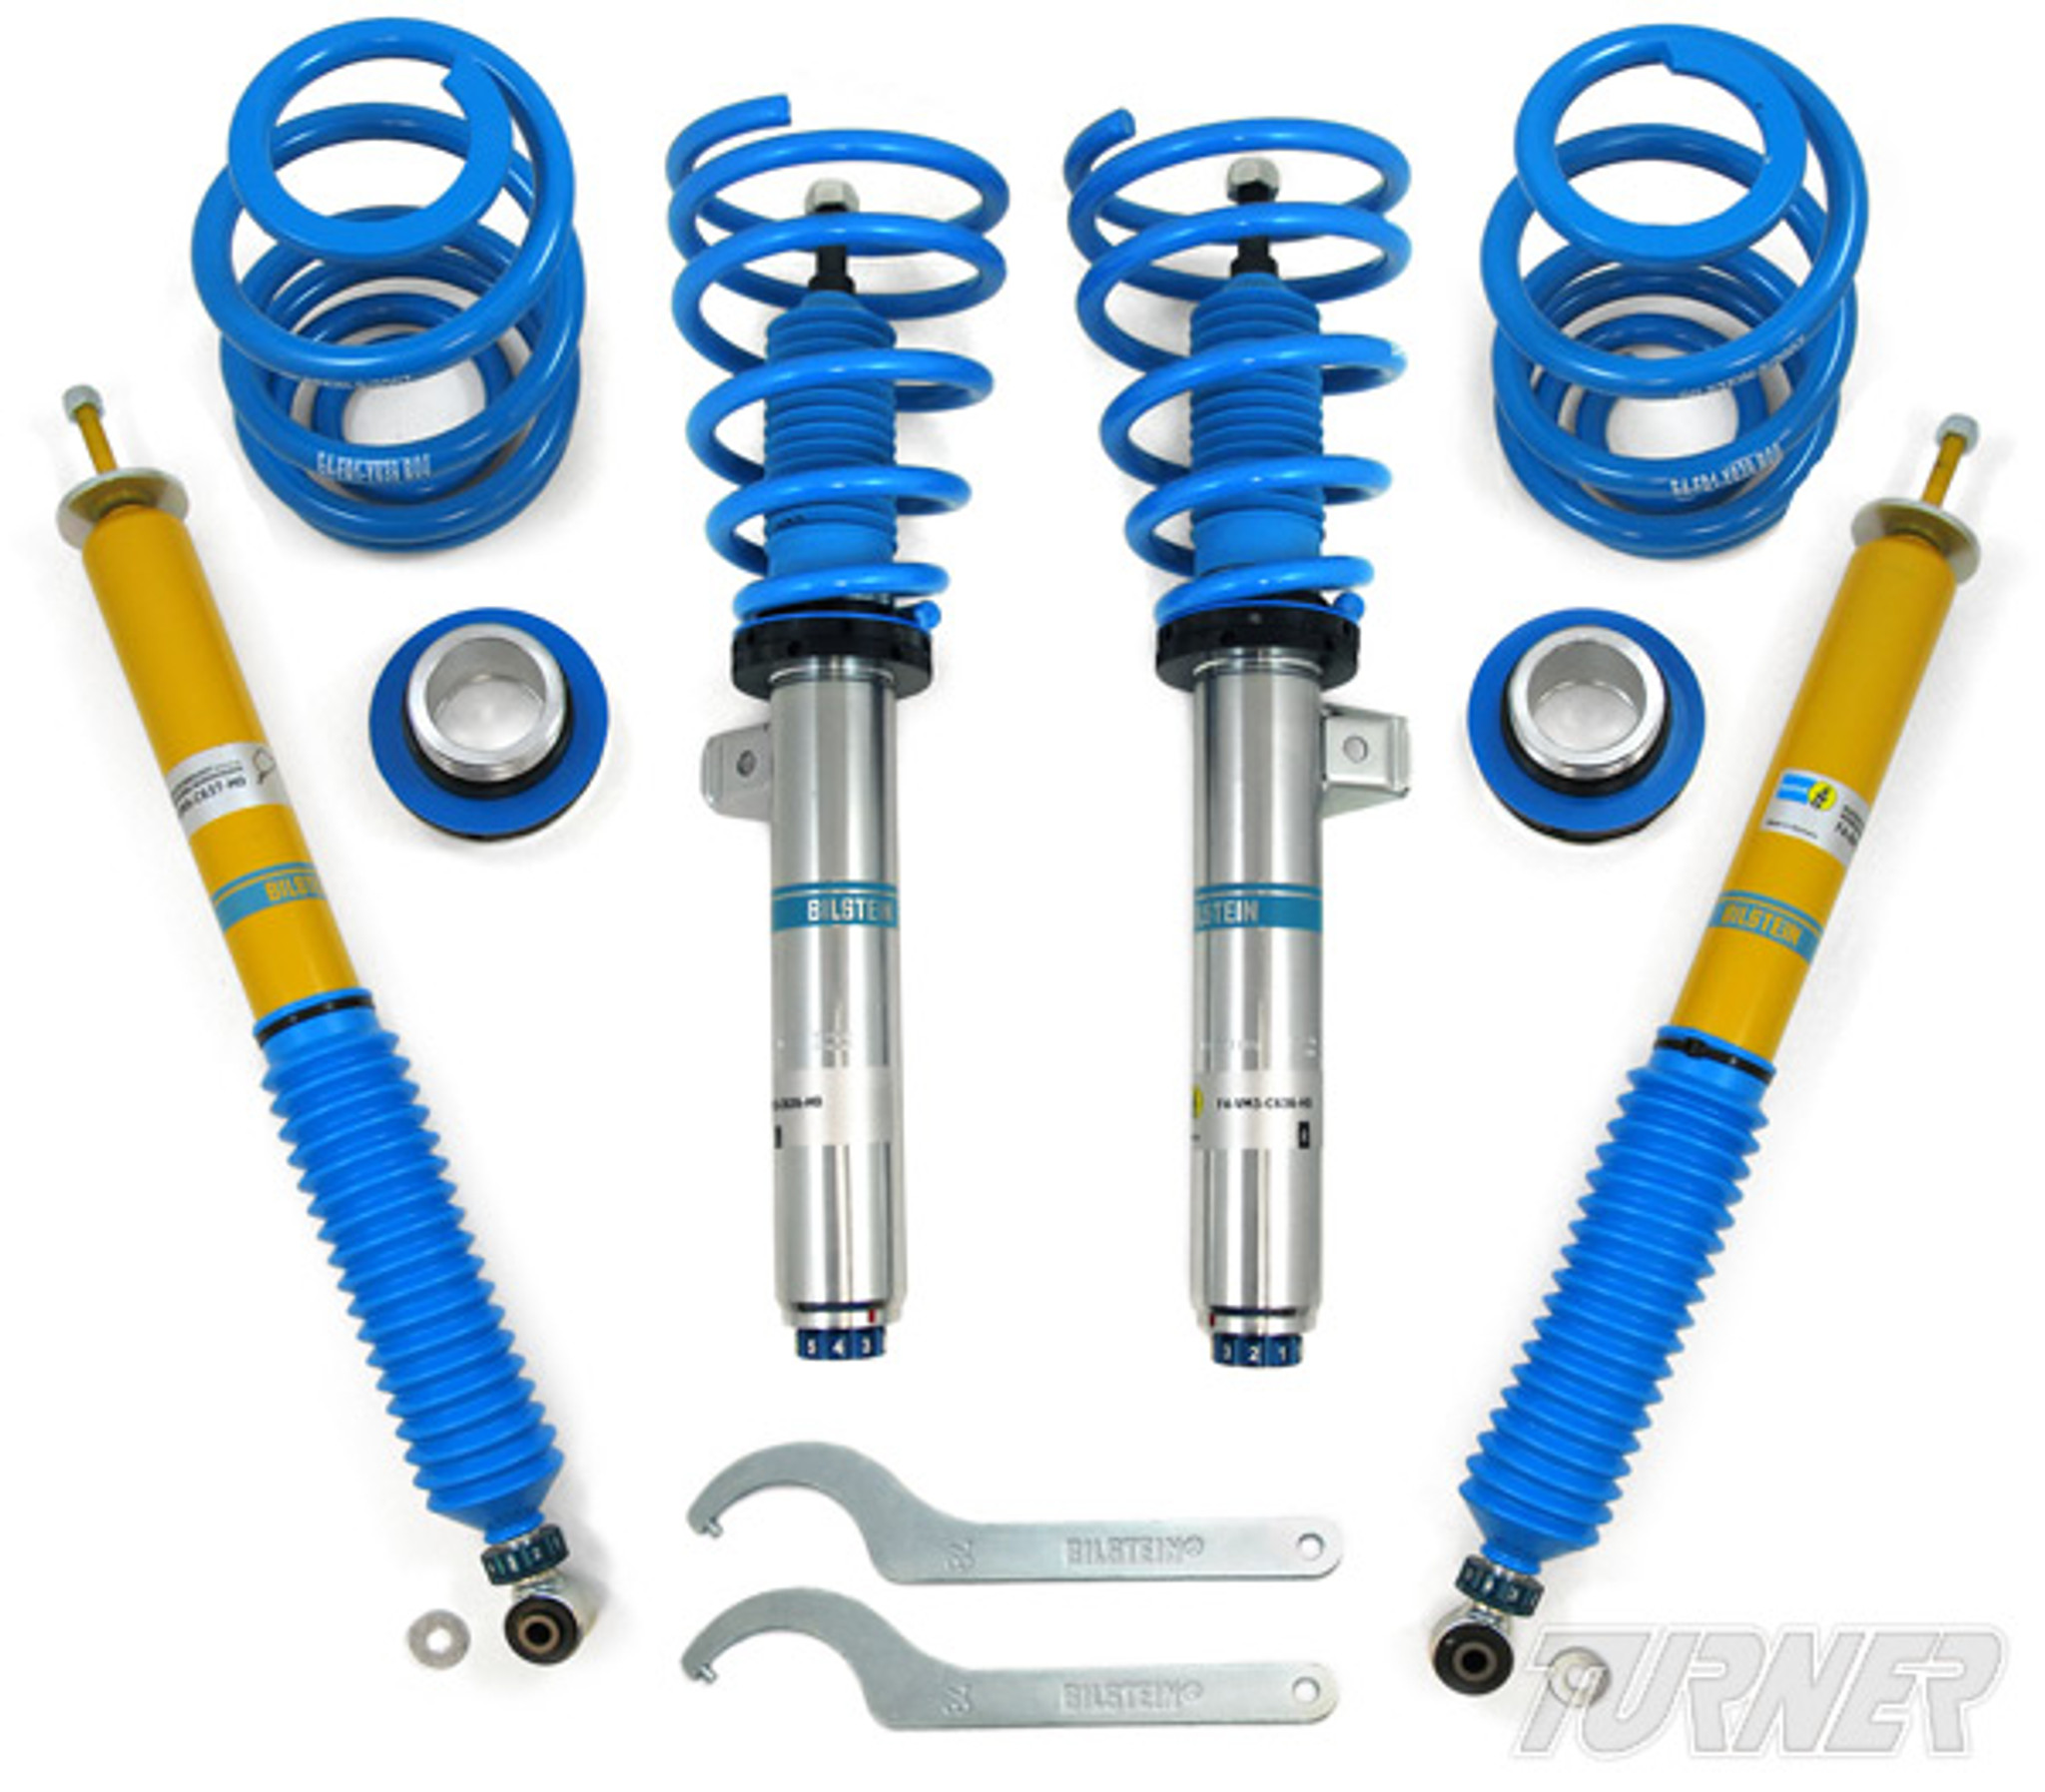 Bilstein B14 coilovers for your Mercedes A45 AMG.